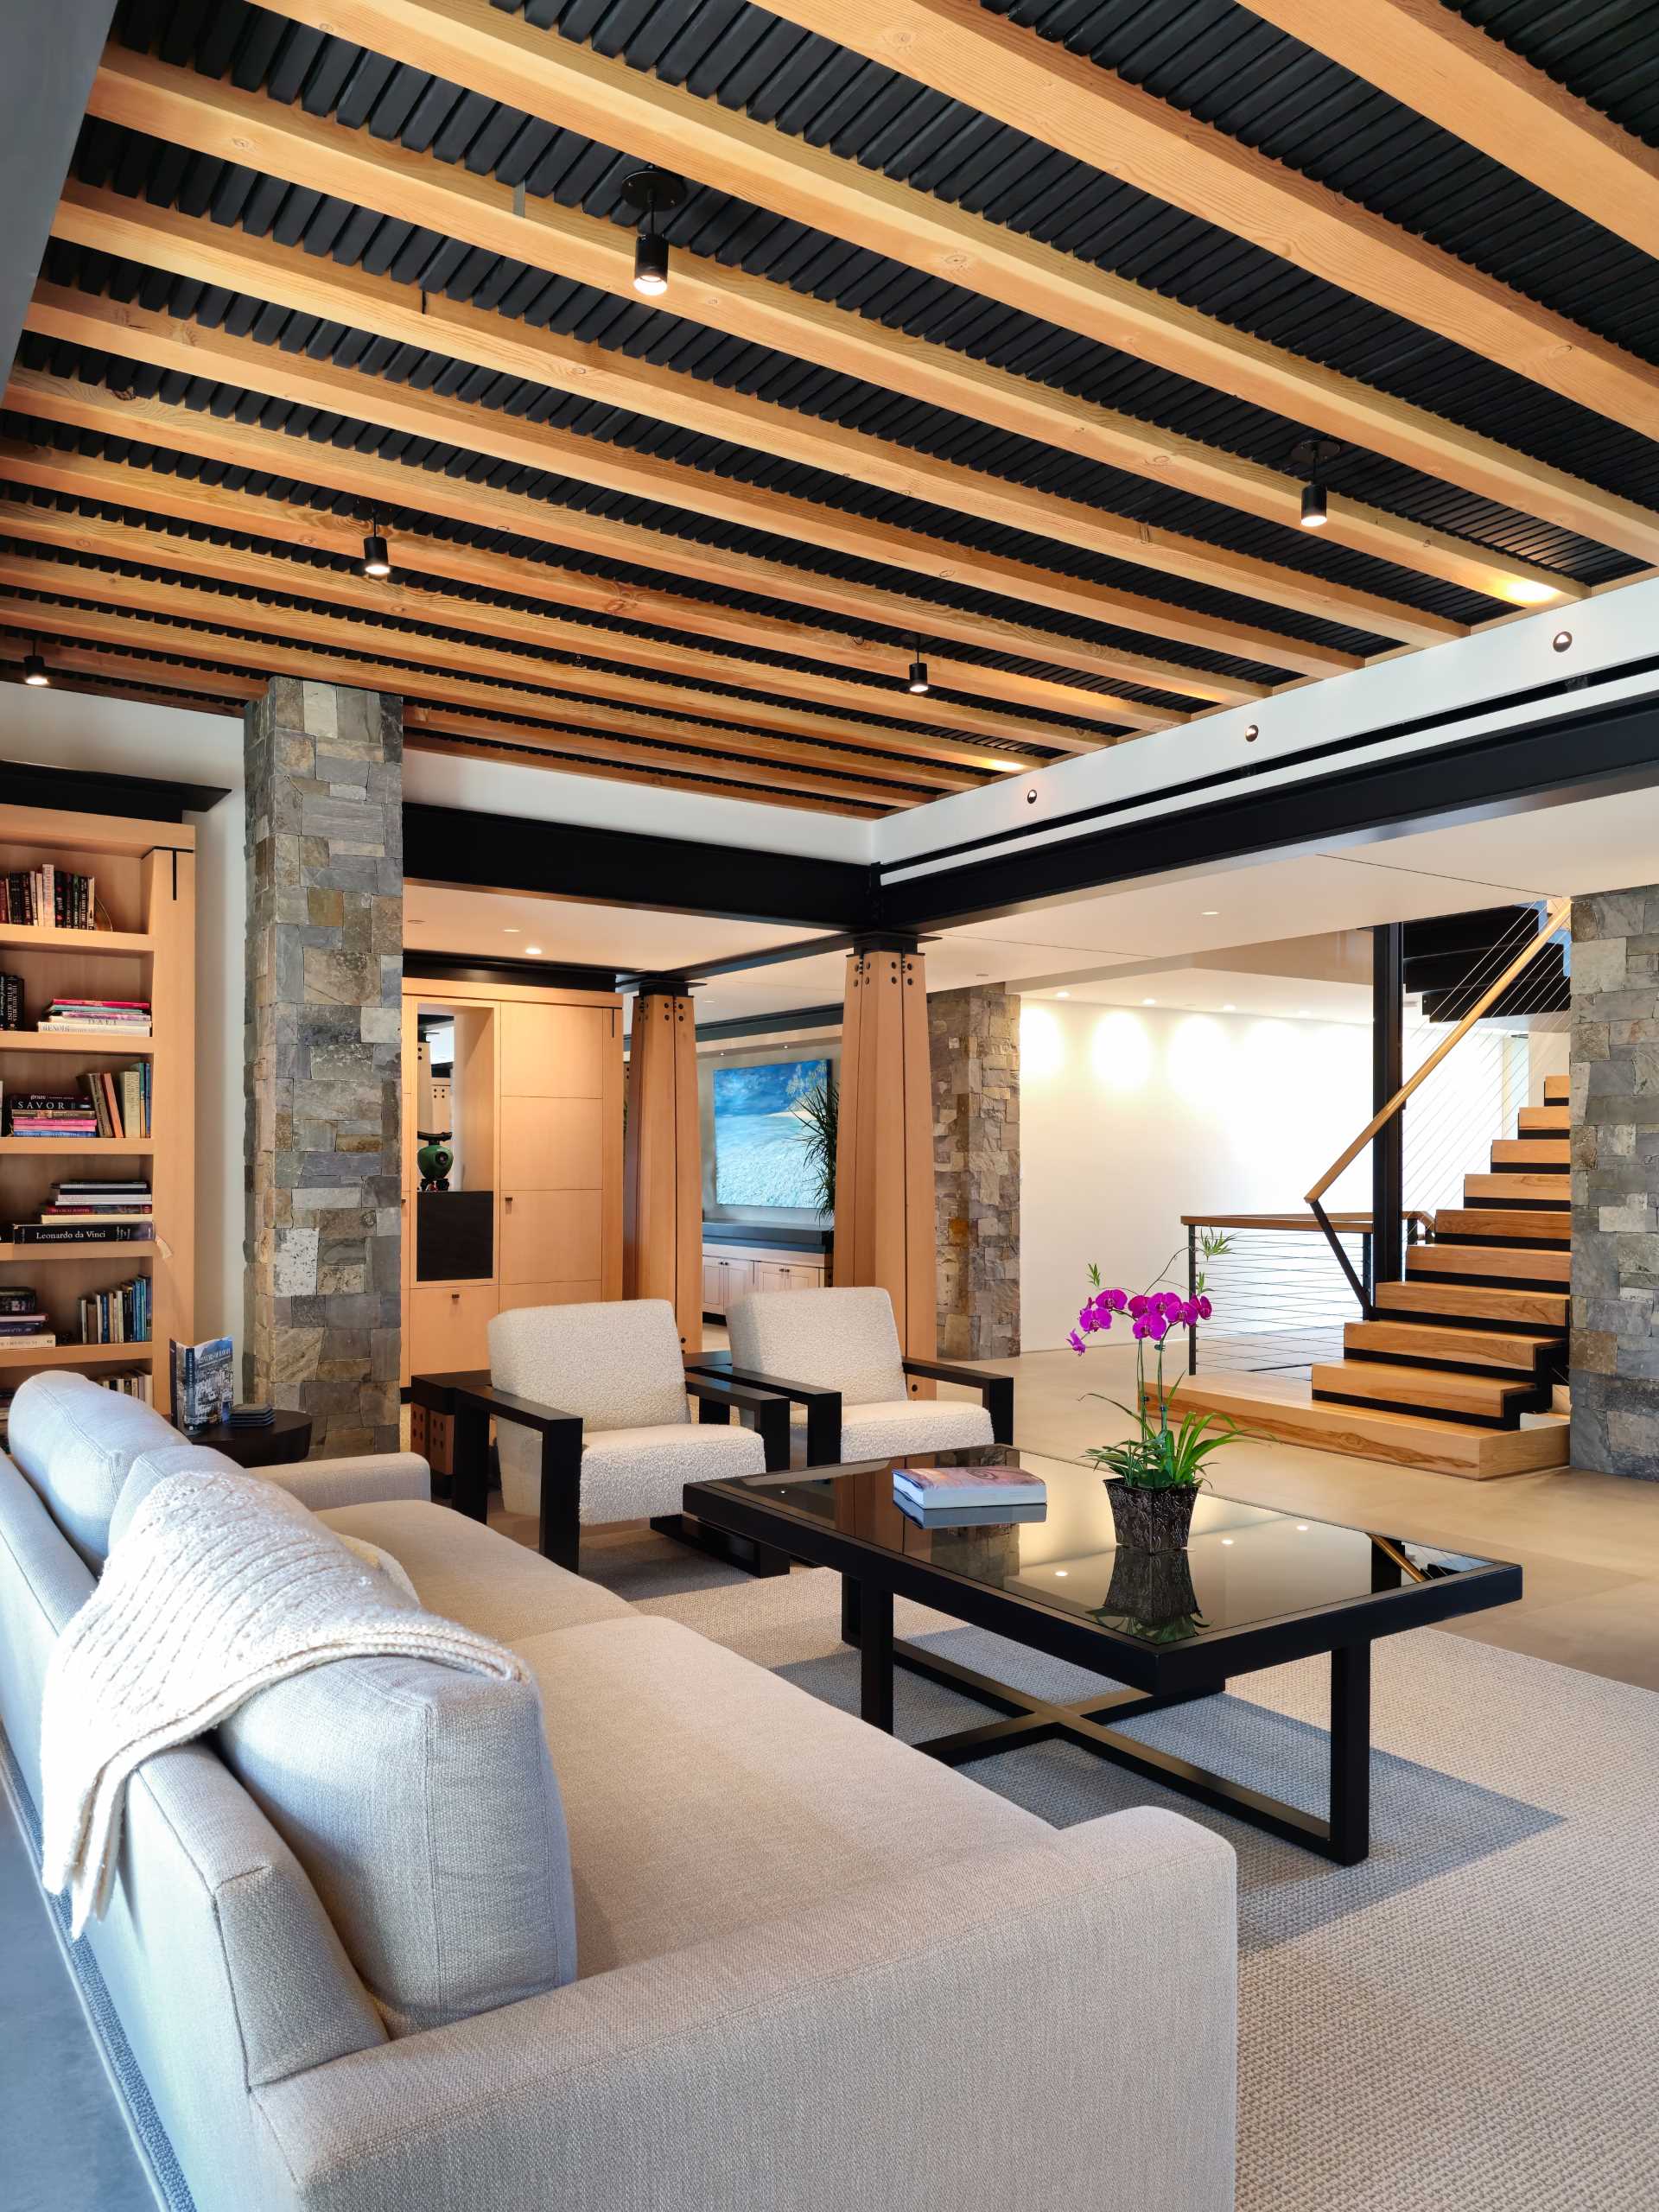 Inside this home, like in the sitting area, the structural elements are easily seen, with exposed wood supports contrastings the black steel beams.